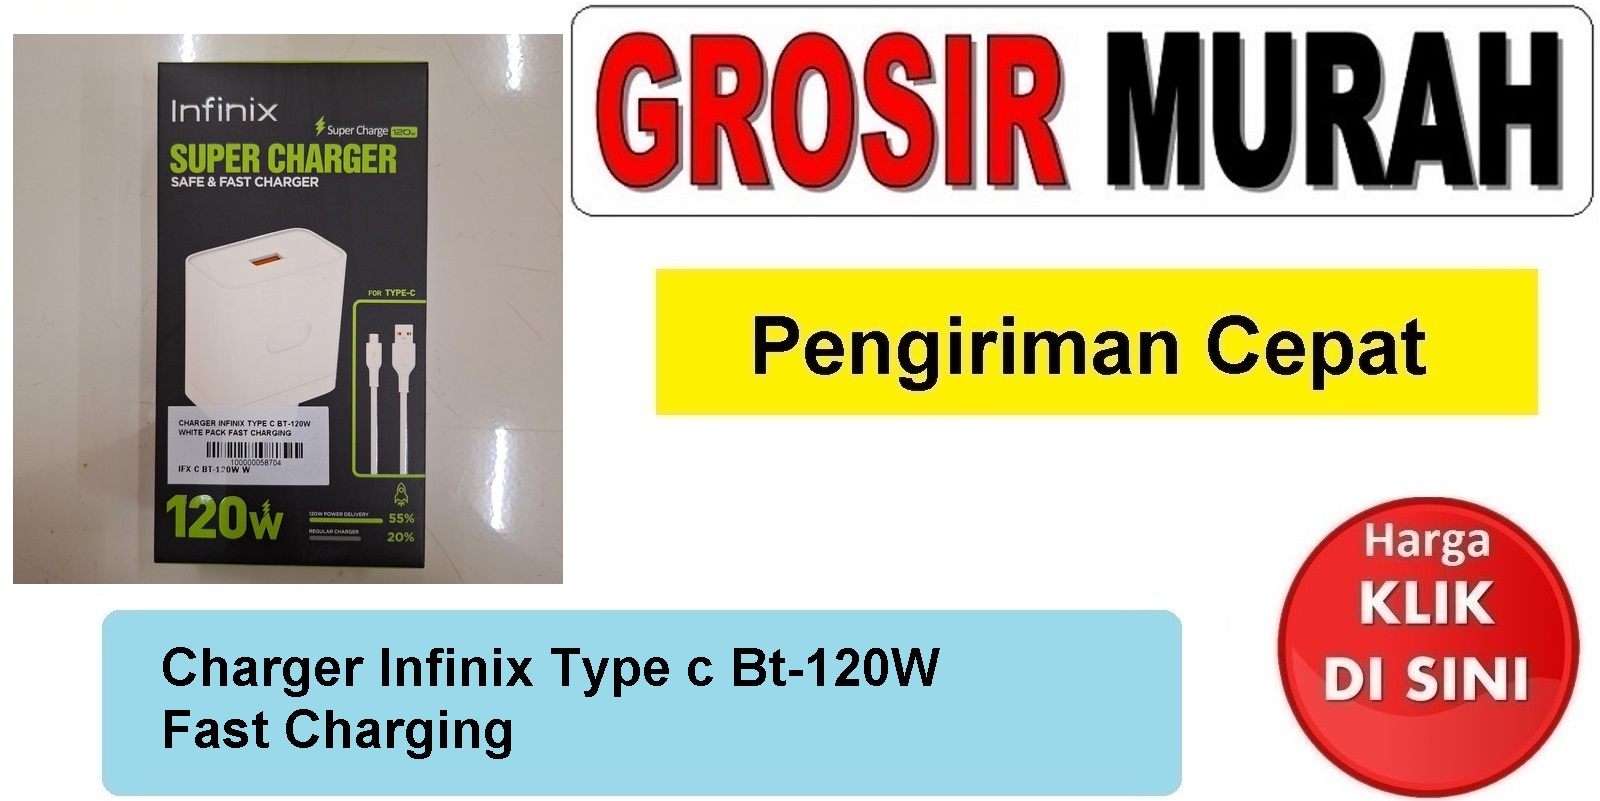 Charger Infinix Type c Bt-120W Fast Charging